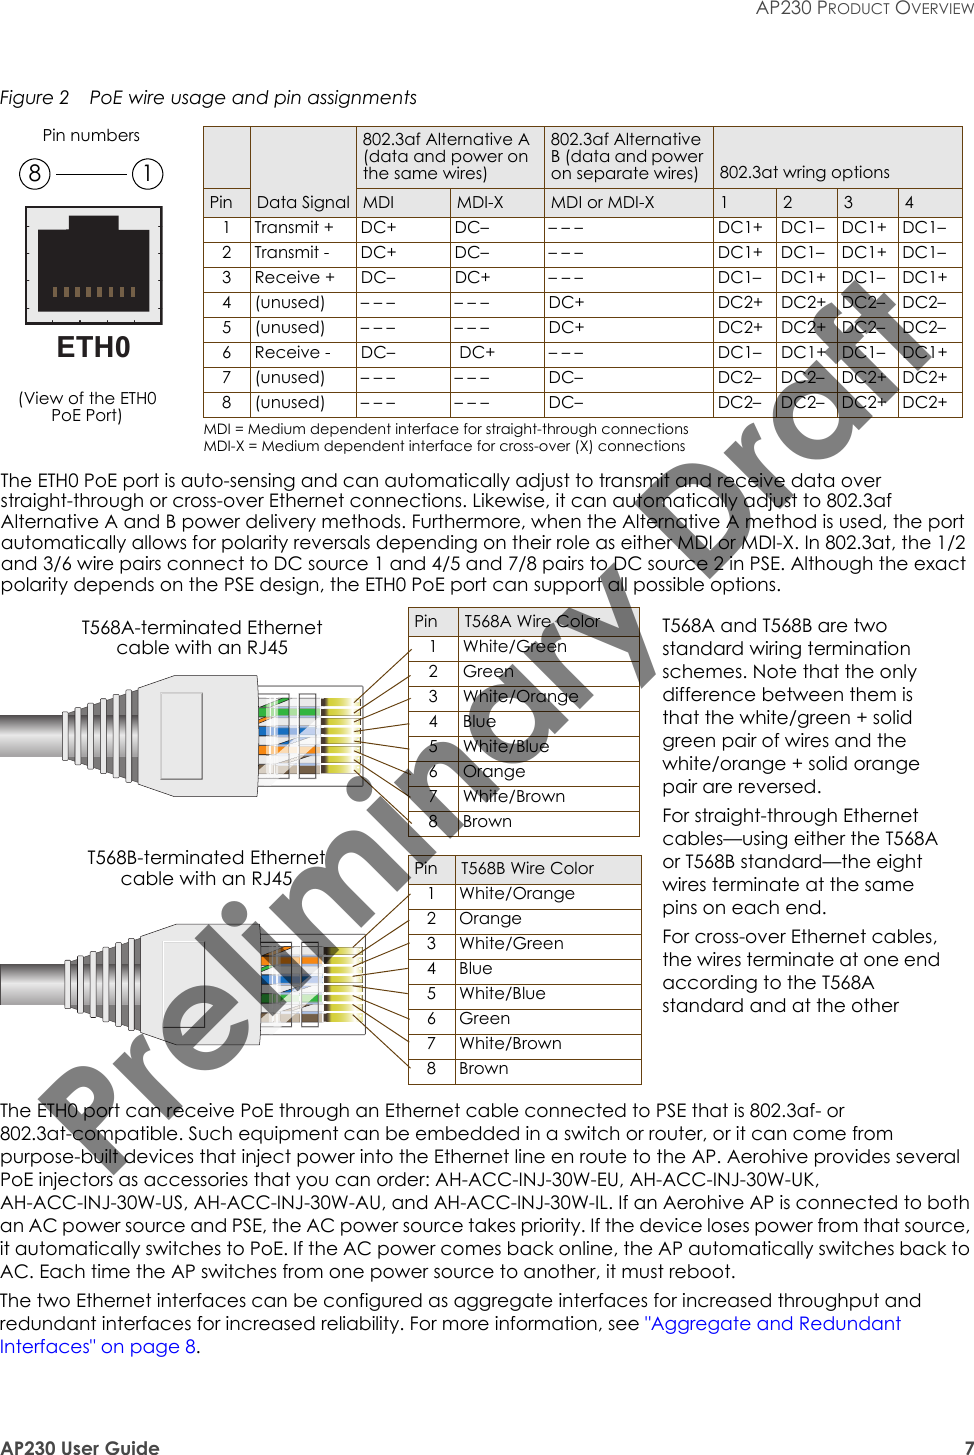 AP230 User Guide 7AP230 PRODUCT OVERVIEWFigure 2  PoE wire usage and pin assignmentsThe ETH0 port can receive PoE through an Ethernet cable connected to PSE that is 802.3af- or 802.3at-compatible. Such equipment can be embedded in a switch or router, or it can come from purpose-built devices that inject power into the Ethernet line en route to the AP. Aerohive provides several PoE injectors as accessories that you can order: AH-ACC-INJ-30W-EU, AH-ACC-INJ-30W-UK, AH-ACC-INJ-30W-US, AH-ACC-INJ-30W-AU, and AH-ACC-INJ-30W-IL. If an Aerohive AP is connected to both an AC power source and PSE, the AC power source takes priority. If the device loses power from that source, it automatically switches to PoE. If the AC power comes back online, the AP automatically switches back to AC. Each time the AP switches from one power source to another, it must reboot.The two Ethernet interfaces can be configured as aggregate interfaces for increased throughput and redundant interfaces for increased reliability. For more information, see &quot;Aggregate and Redundant Interfaces&quot; on page 8.ETH0Pin T568A Wire Color1White/Green2Green3 White/Orange4Blue5White/Blue6Orange7White/Brown8Brown(View of the ETH0 PoE Port)8 1Pin numbersPin T568B Wire Color1 White/Orange2 Orange3 White/Green4Blue5White/Blue6Green7White/Brown8BrownT568A-terminated Ethernet cable with an RJ45 Data Signal802.3af Alternative A (data and power on the same wires)802.3af Alternative B (data and power on separate wires) 802.3at wring optionsPin MDI MDI-X MDI or MDI-X 1 2 3 41 Transmit + DC+ DC– – – – DC1+ DC1– DC1+ DC1–2 Transmit - DC+ DC– – – – DC1+ DC1– DC1+ DC1–3 Receive + DC– DC+ – – – DC1– DC1+ DC1– DC1+4 (unused) – – – – – – DC+ DC2+ DC2+ DC2– DC2–5 (unused) – – – – – – DC+ DC2+ DC2+ DC2– DC2–6 Receive - DC–  DC+ – – – DC1– DC1+ DC1– DC1+7 (unused) – – – – – – DC– DC2– DC2– DC2+ DC2+8 (unused) – – – – – – DC– DC2– DC2– DC2+ DC2+MDI = Medium dependent interface for straight-through connectionsMDI-X = Medium dependent interface for cross-over (X) connectionsThe ETH0 PoE port is auto-sensing and can automatically adjust to transmit and receive data over straight-through or cross-over Ethernet connections. Likewise, it can automatically adjust to 802.3af Alternative A and B power delivery methods. Furthermore, when the Alternative A method is used, the port automatically allows for polarity reversals depending on their role as either MDI or MDI-X. In 802.3at, the 1/2 and 3/6 wire pairs connect to DC source 1 and 4/5 and 7/8 pairs to DC source 2 in PSE. Although the exact polarity depends on the PSE design, the ETH0 PoE port can support all possible options.T568B-terminated Ethernet cable with an RJ45 T568A and T568B are two standard wiring termination schemes. Note that the only difference between them is that the white/green + solid green pair of wires and the white/orange + solid orange pair are reversed.For straight-through Ethernet cables—using either the T568A or T568B standard—the eight wires terminate at the same pins on each end.For cross-over Ethernet cables, the wires terminate at one end according to the T568A standard and at the other Preliminary Draft 